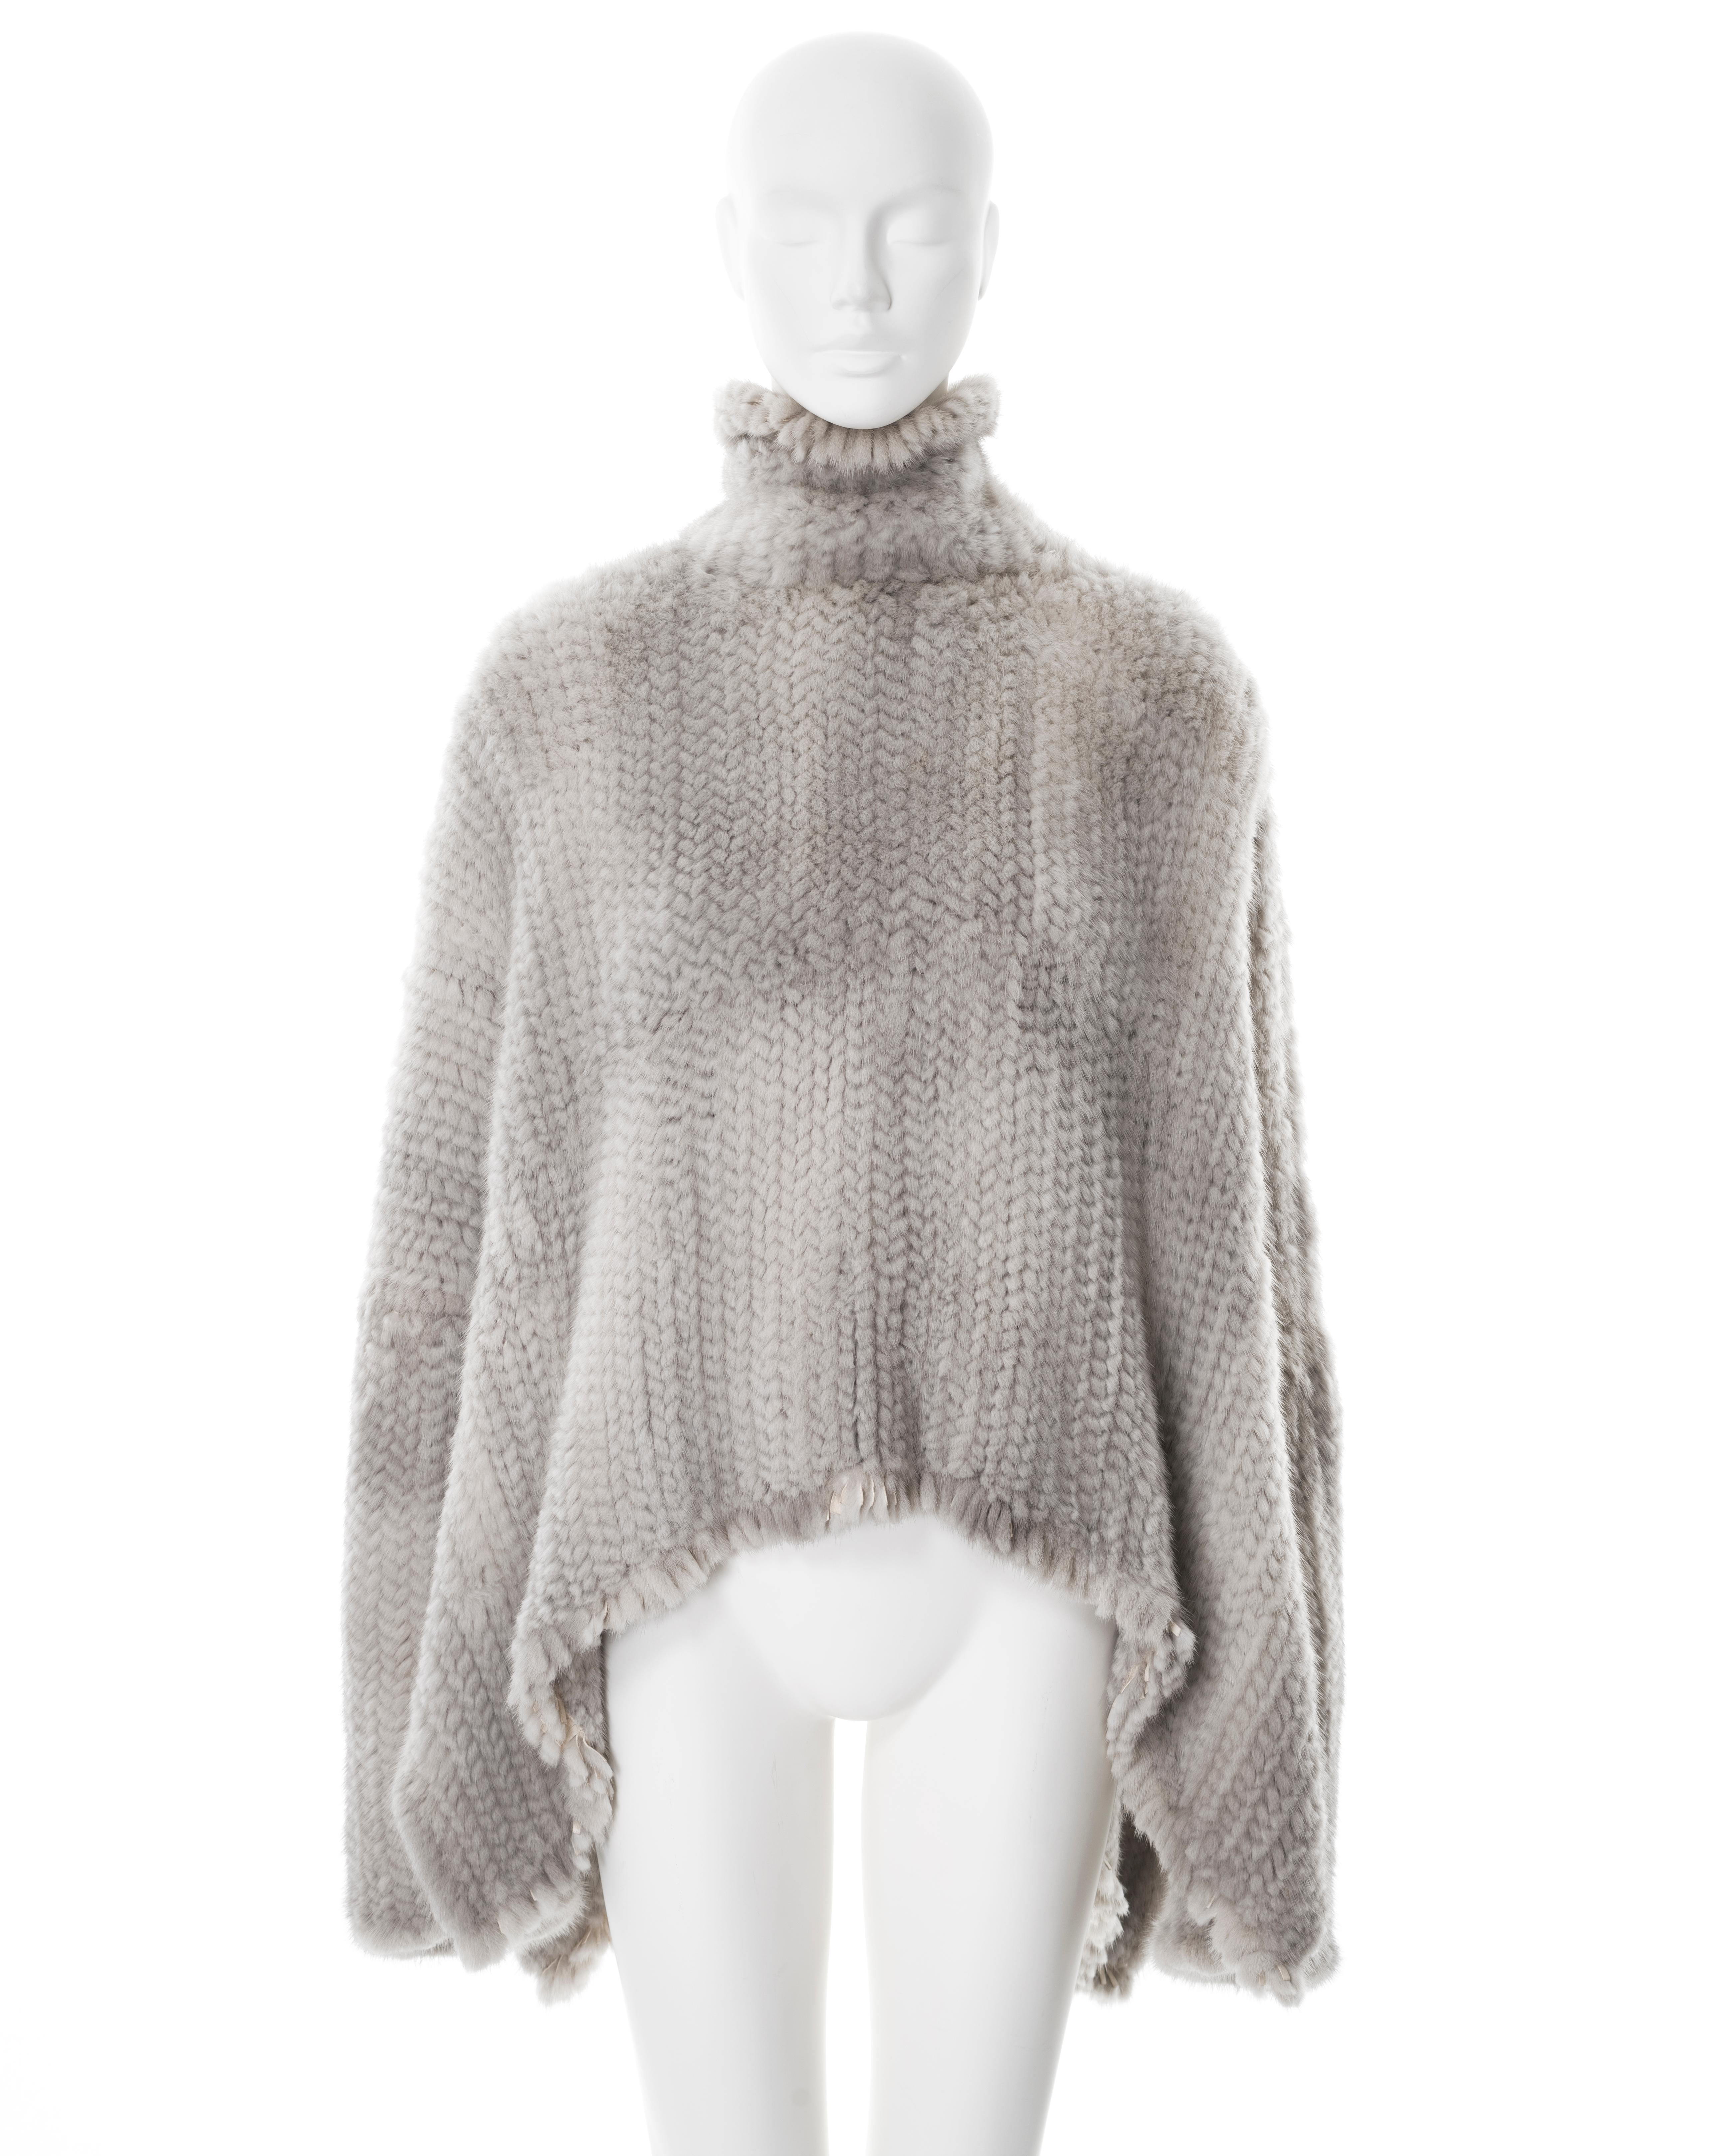 ▪ Christian Dior fur sweater
▪ Creative Director: John Galliano
▪ Sold by One of a Kind Archive
▪ Fall-Winter 2000
▪ Constructed from knitted light grey mink fur 
▪ Wide cut 
▪ Oversized fit 
▪ High-low hemline 
▪ Size FR 42 - UK 14 - US 10
▪ Made